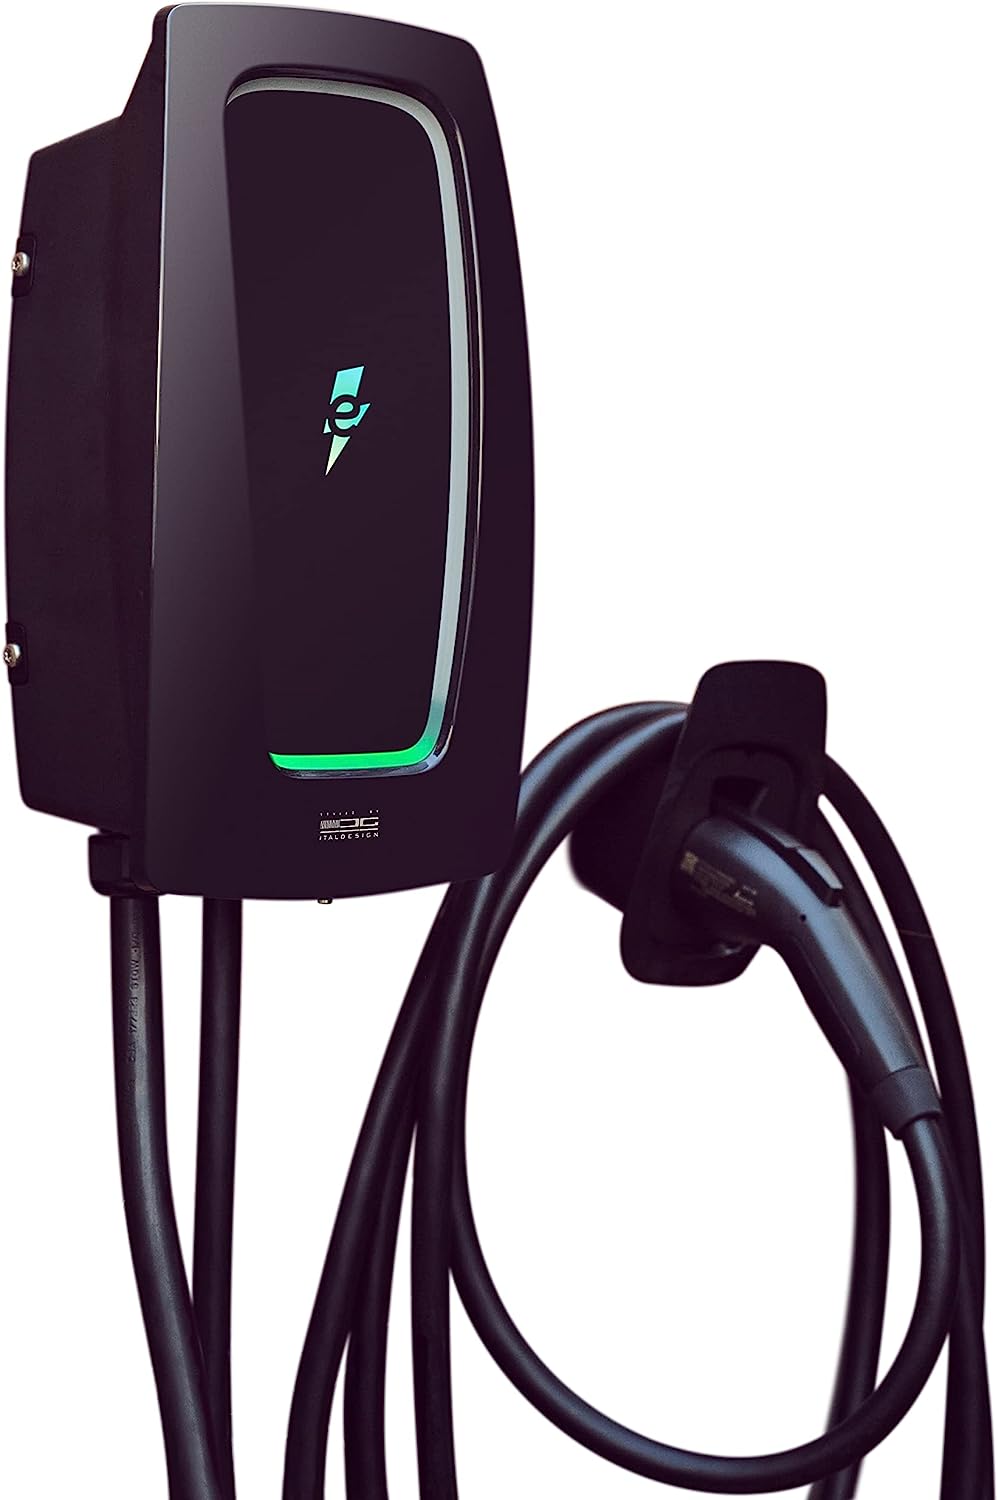 Electrify HomeStation charger.